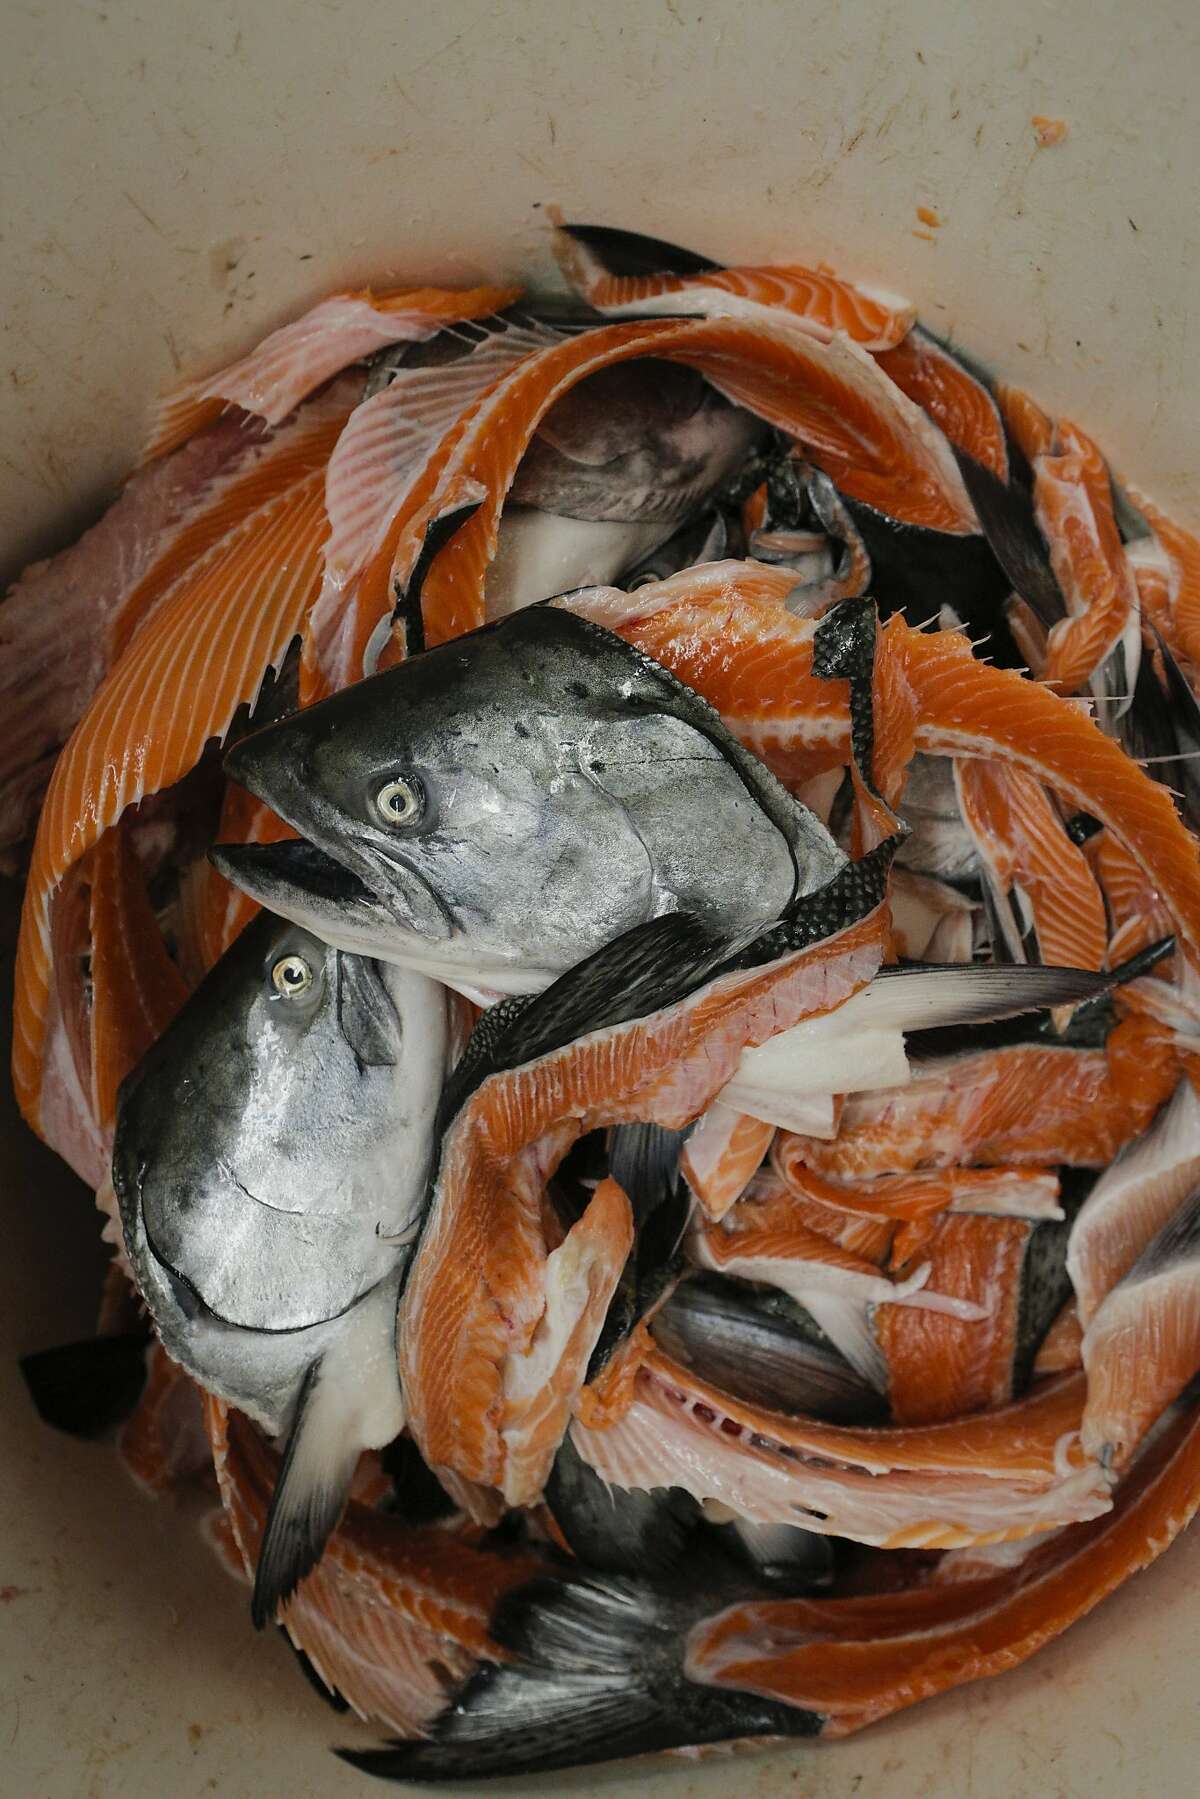 Wild king salmon carcasses are seen at the North Coast Fisheries processing plant in Santa Rosa, California, on Friday, July 17, 2015. Siren Fish Company, owned by Anna Larsen, has its fish processed at North Coast Fisheries. Siren Fish Company specializes in providing locally caught, sustainable fish to its "CSF" members on a weekly basis.